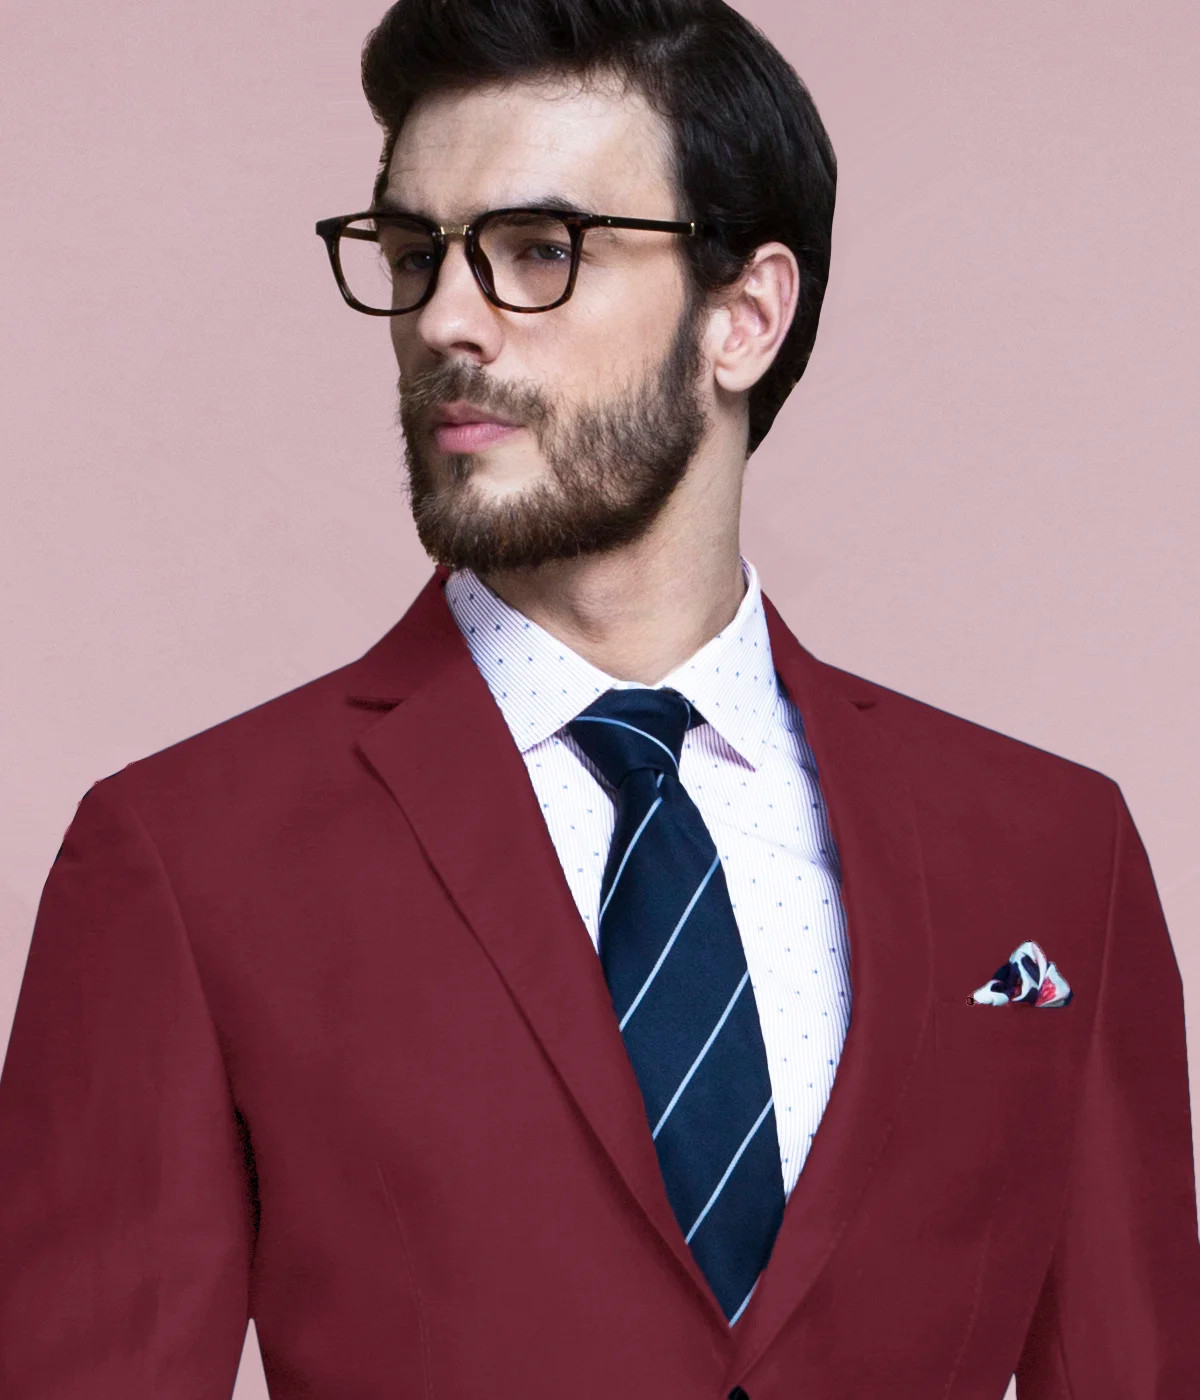 Check Out Mens Burgundy Blazer Combinations💜Maroon Wine Color Suit, Sport  Coat, Jacket, Shirts, Out | カジュアルな男性ファッション, 男性ファッション, ファッション